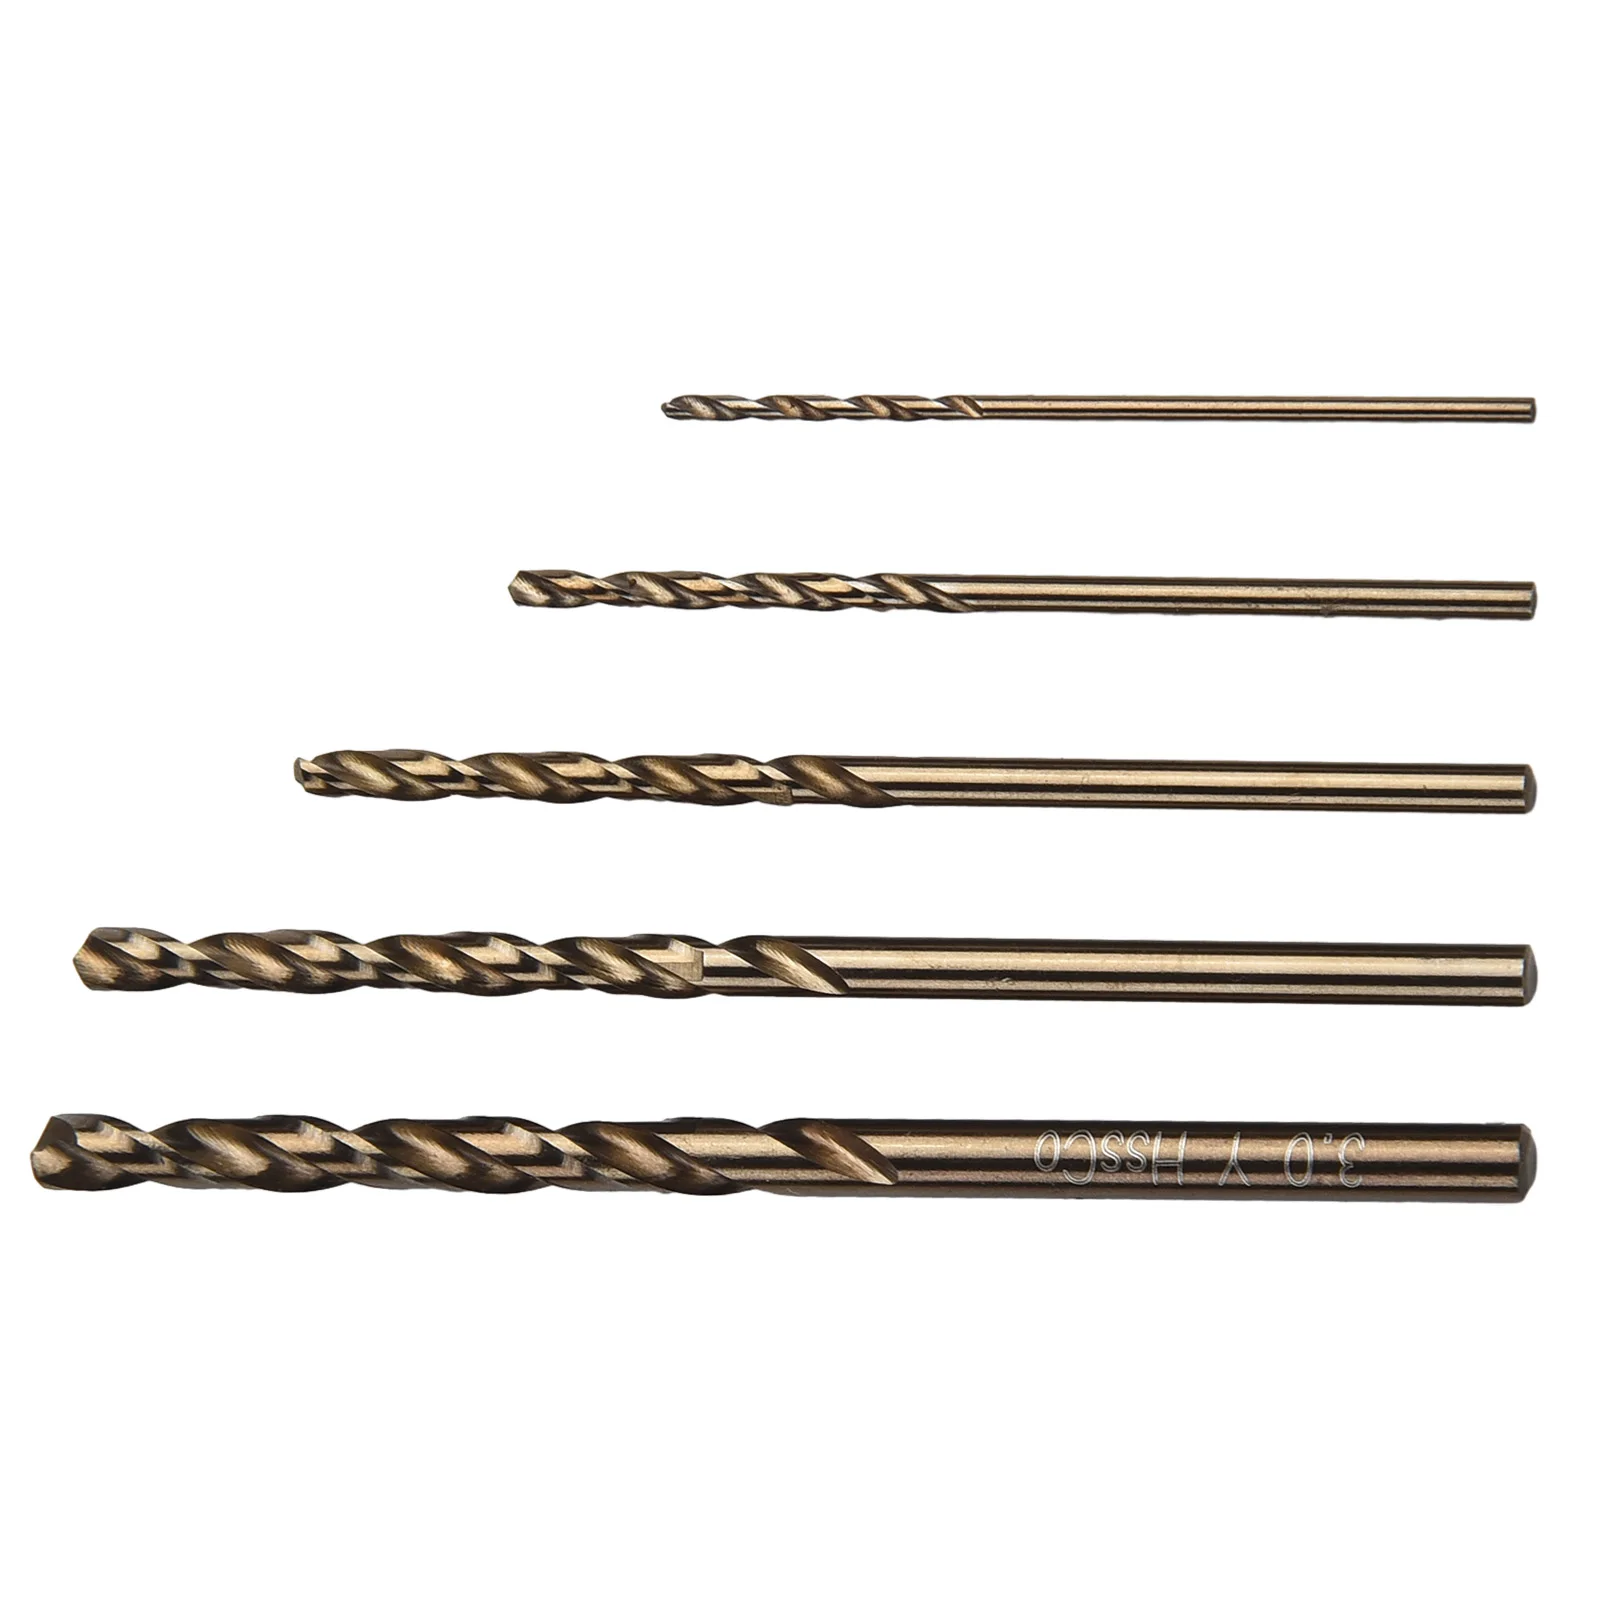 

Auger Type HSS Co M35 Cobalt Drill Bit Set Enhanced Drilling Efficiency for Stainless Steel Includes 5 Long Lasting Bits